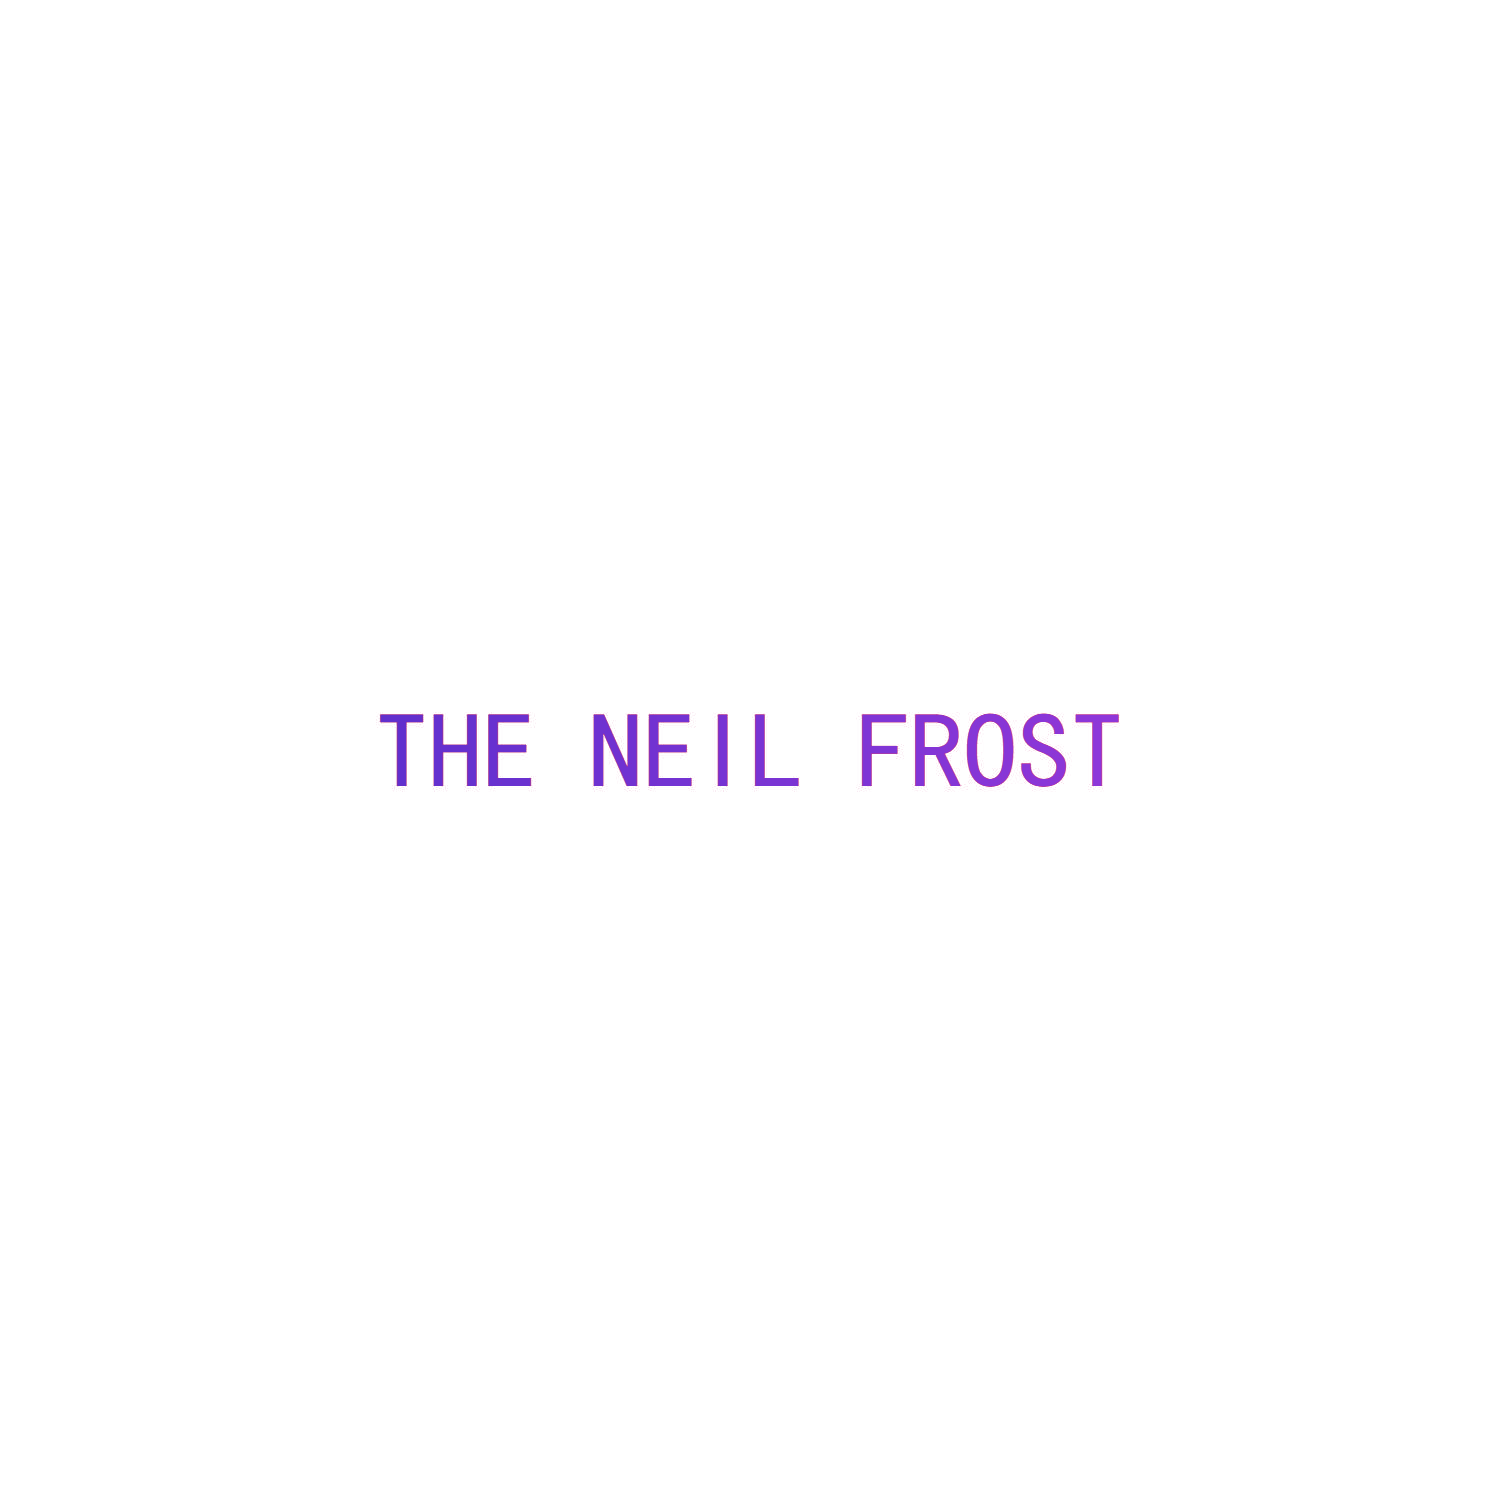 THE NEIL FROST